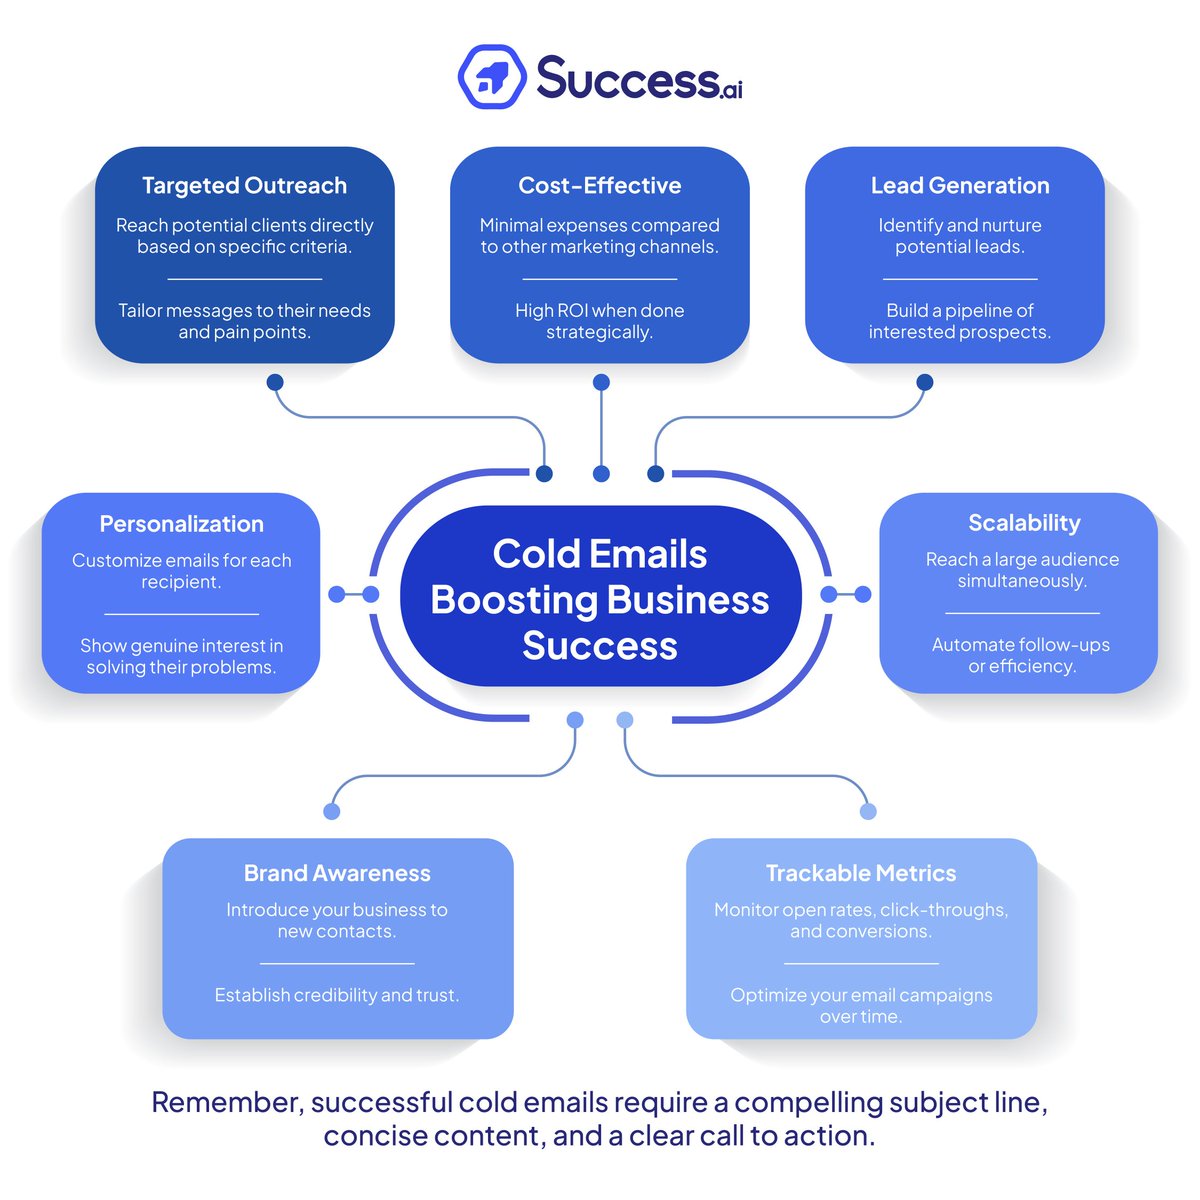 Break through barriers and ignite your sales pipeline with cold emails! Reach out to prospects beyond your circle, nurture valuable relationships, and watch your business soar. #EmailOutreach #SalesAutomation #BusinessSuccess #SuccessAI #Entrepreneurship